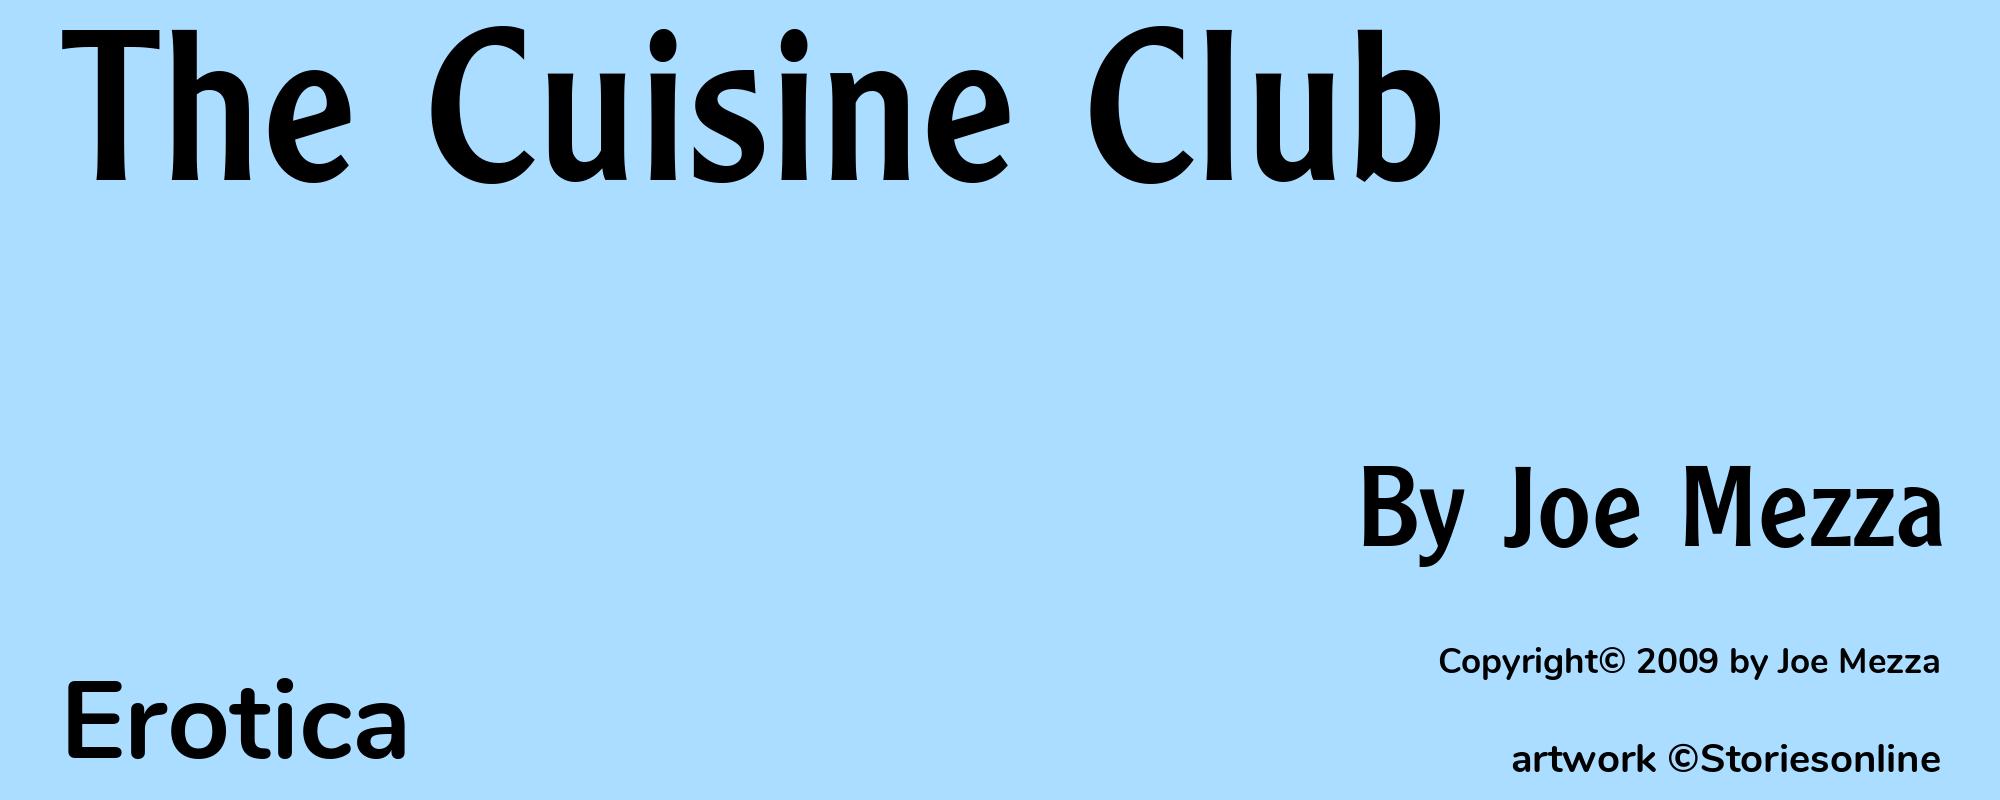 The Cuisine Club - Cover